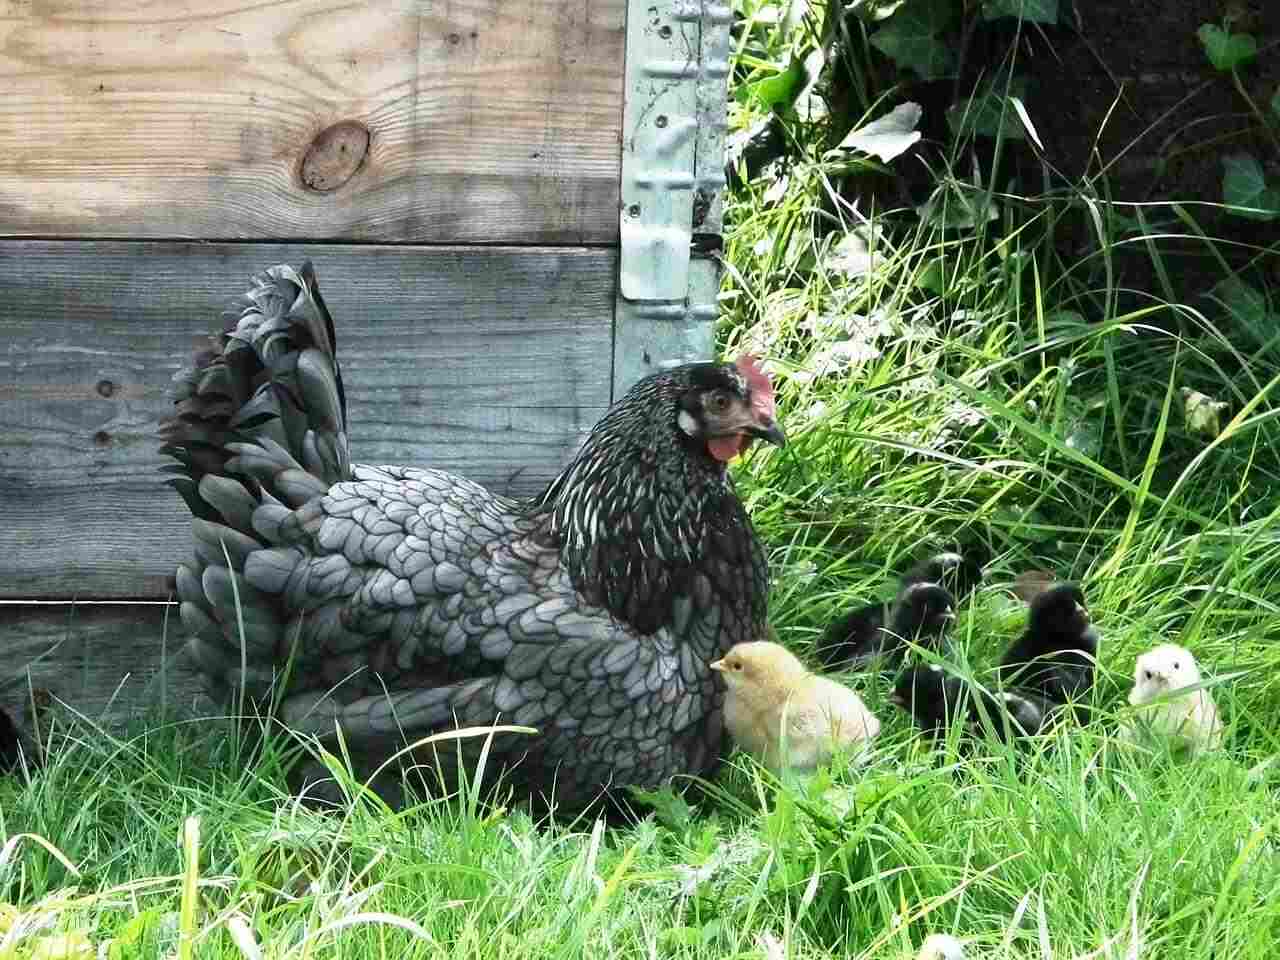 How Long Does It Take For A Chicken To Grow?